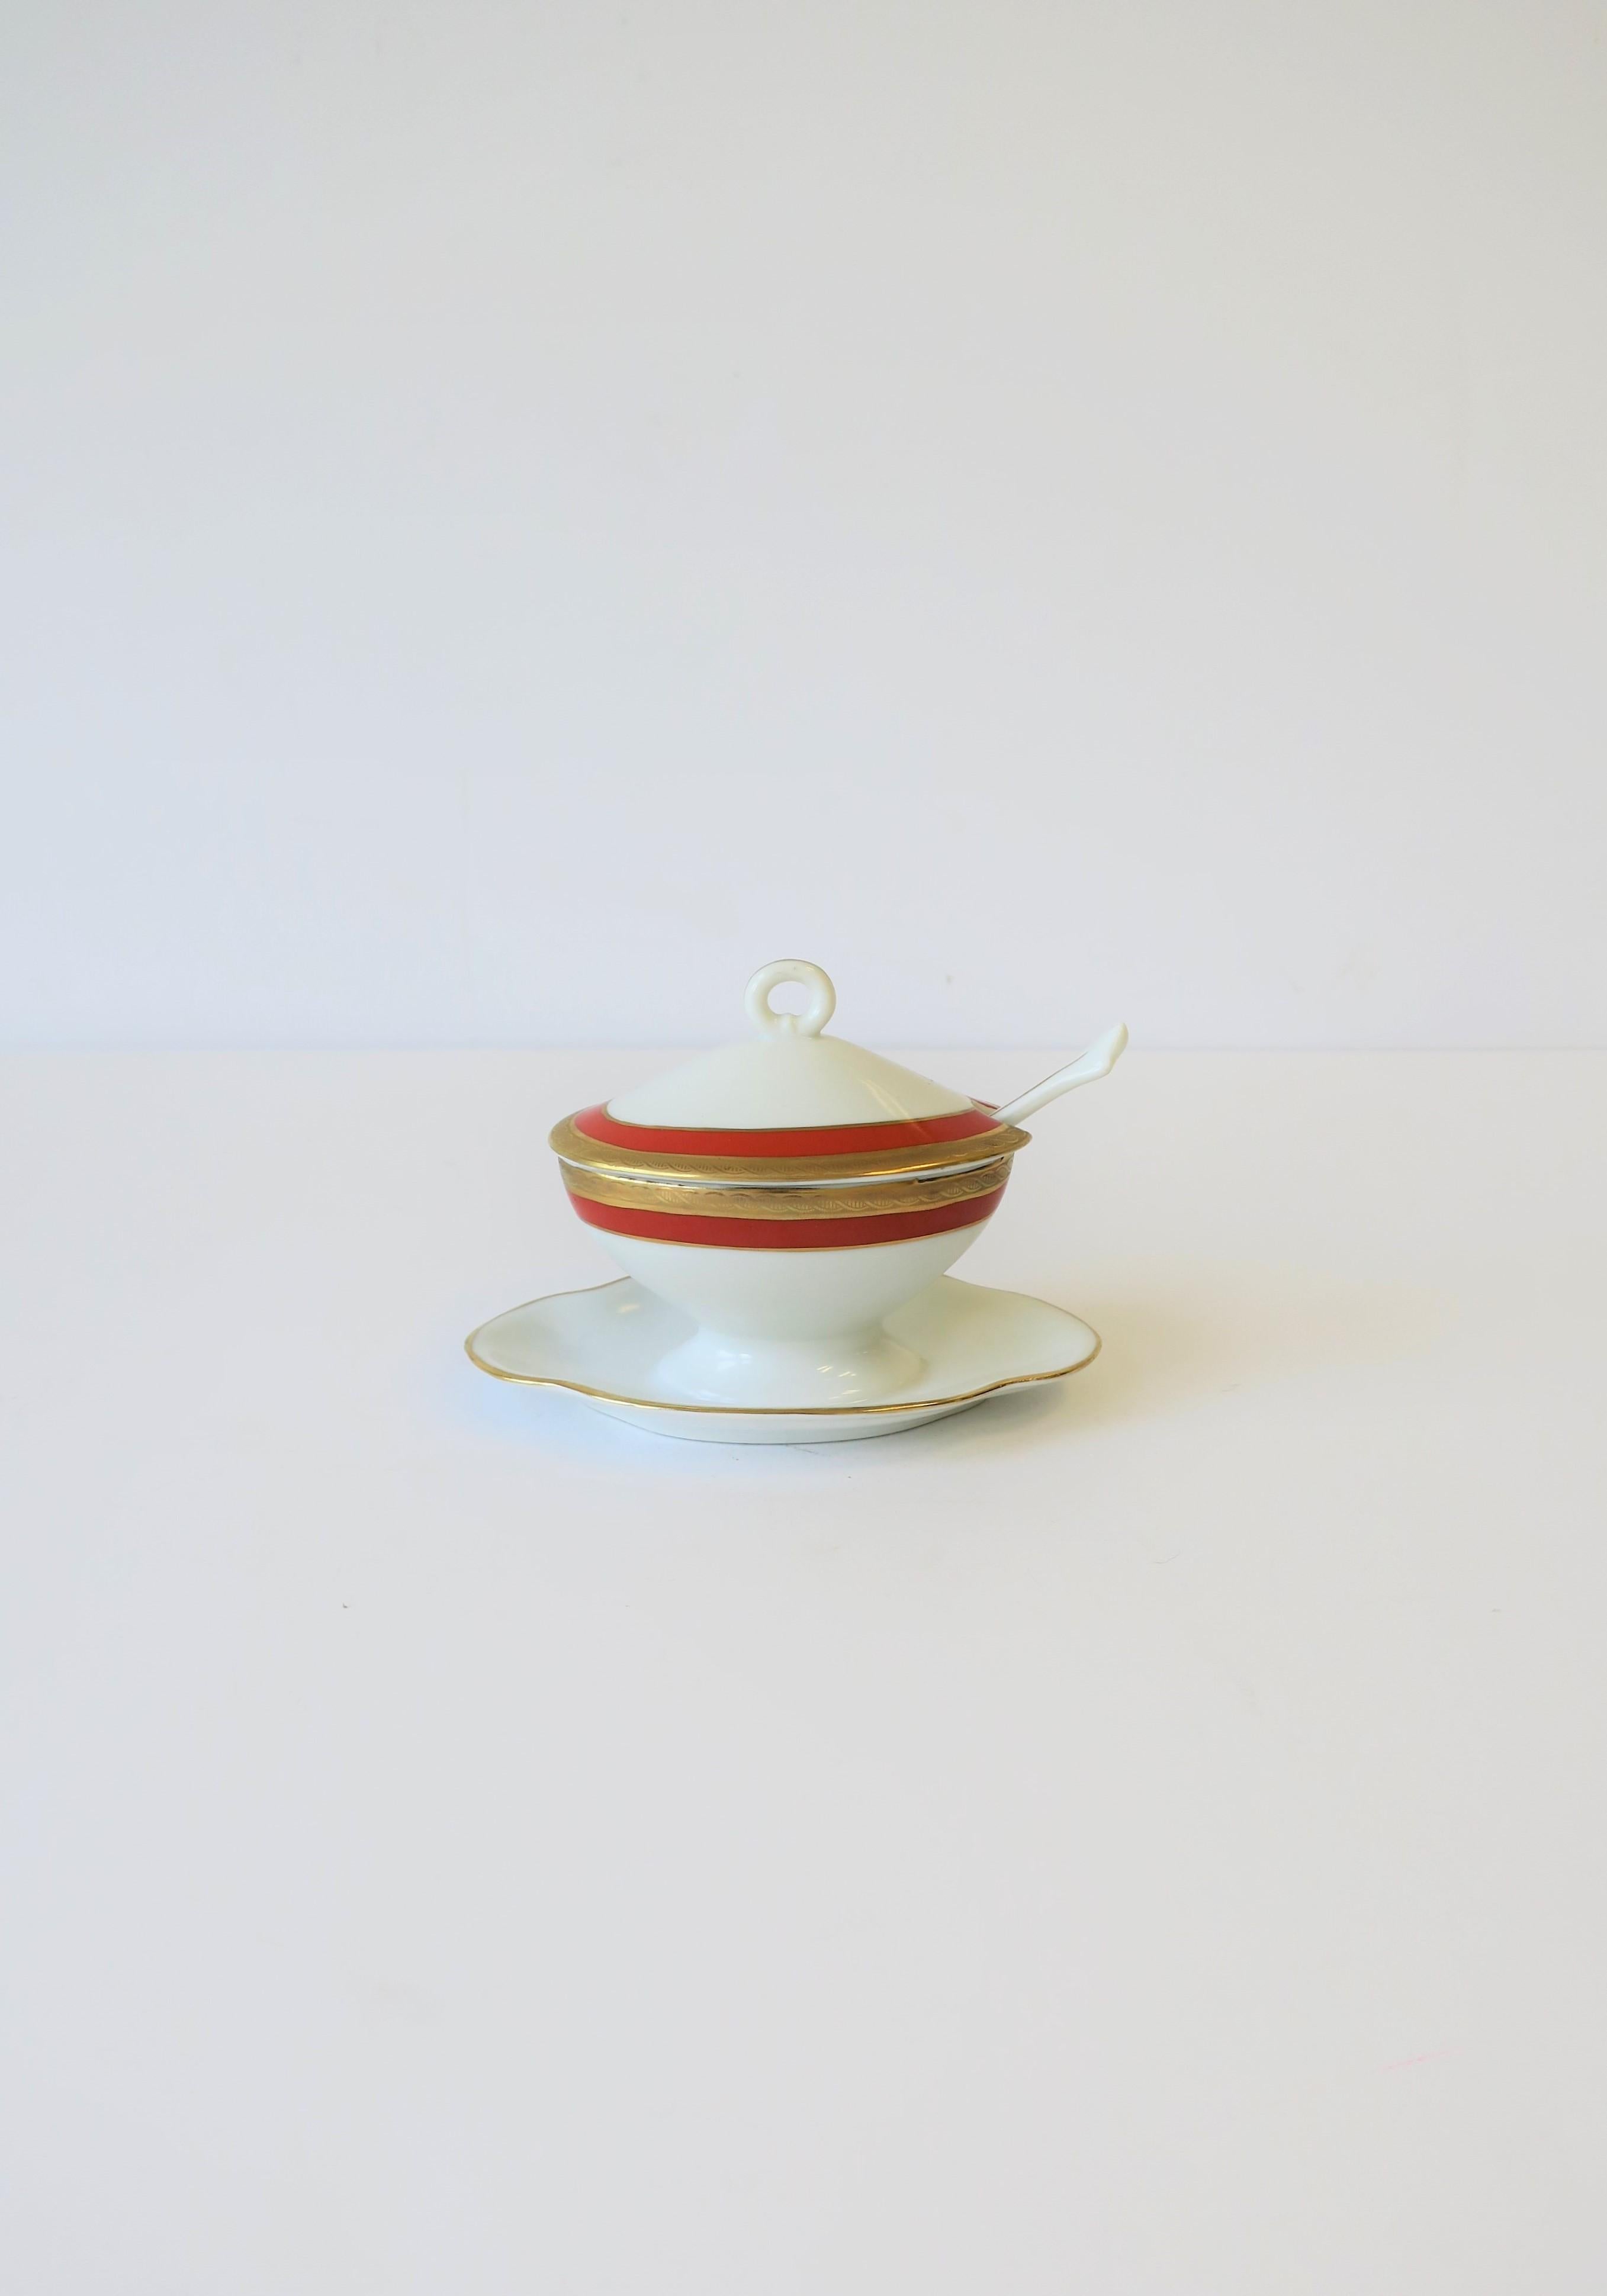 A beautiful Italian white and gold condiments dish/vessel with spoon by designer Richard Ginori, with decorative gold band and detail, circa mid-20th century, Italy. Colors include: white porcelain, gold gilt, and a red/orange accent band. With